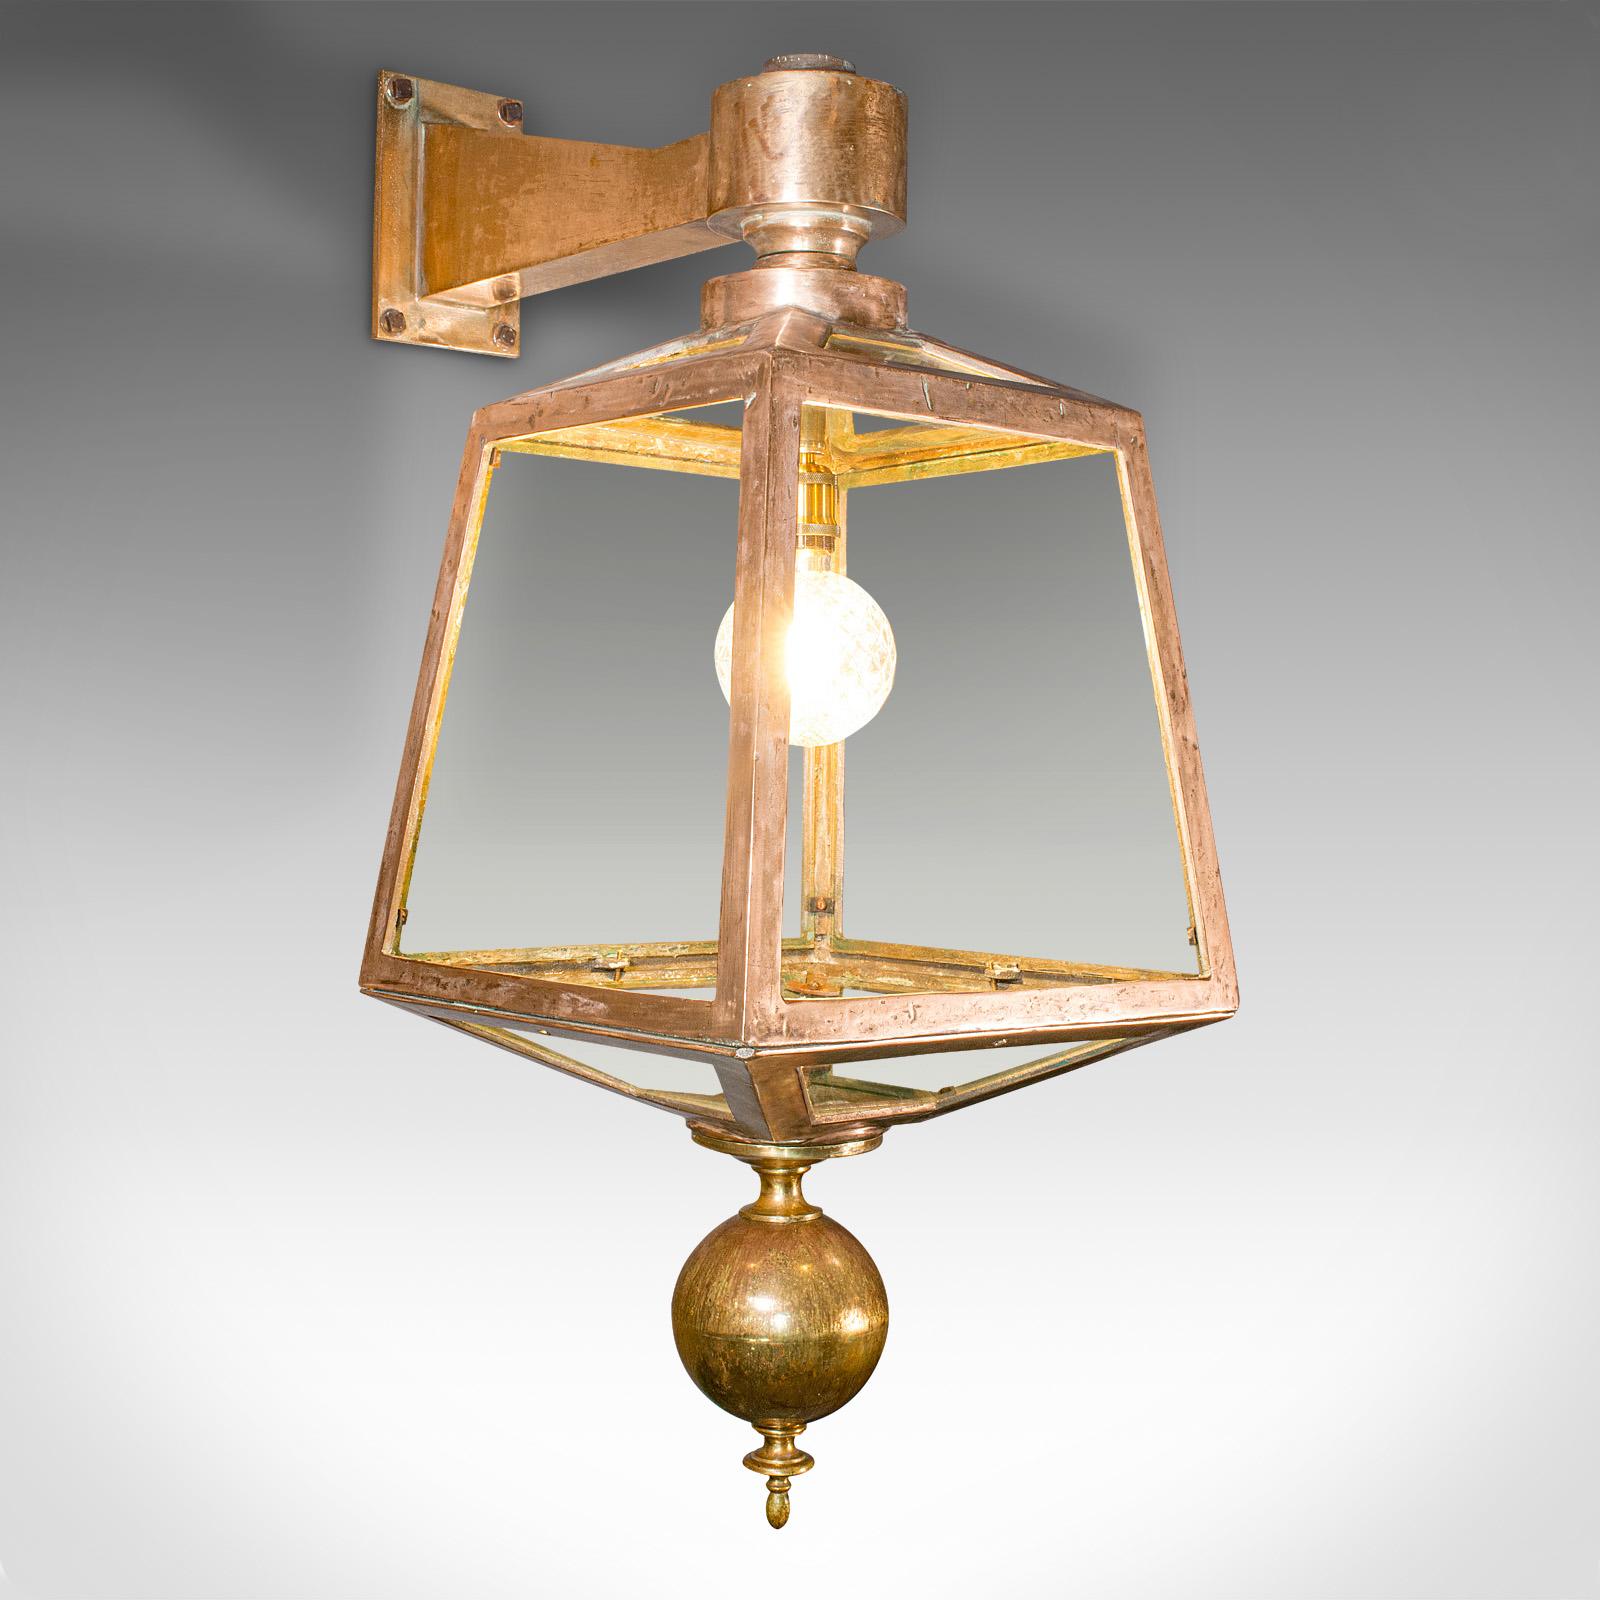 Large Antique Courtyard Light, English, Bronze, Outdoor Lamp, Victorian, C.1870 For Sale 5